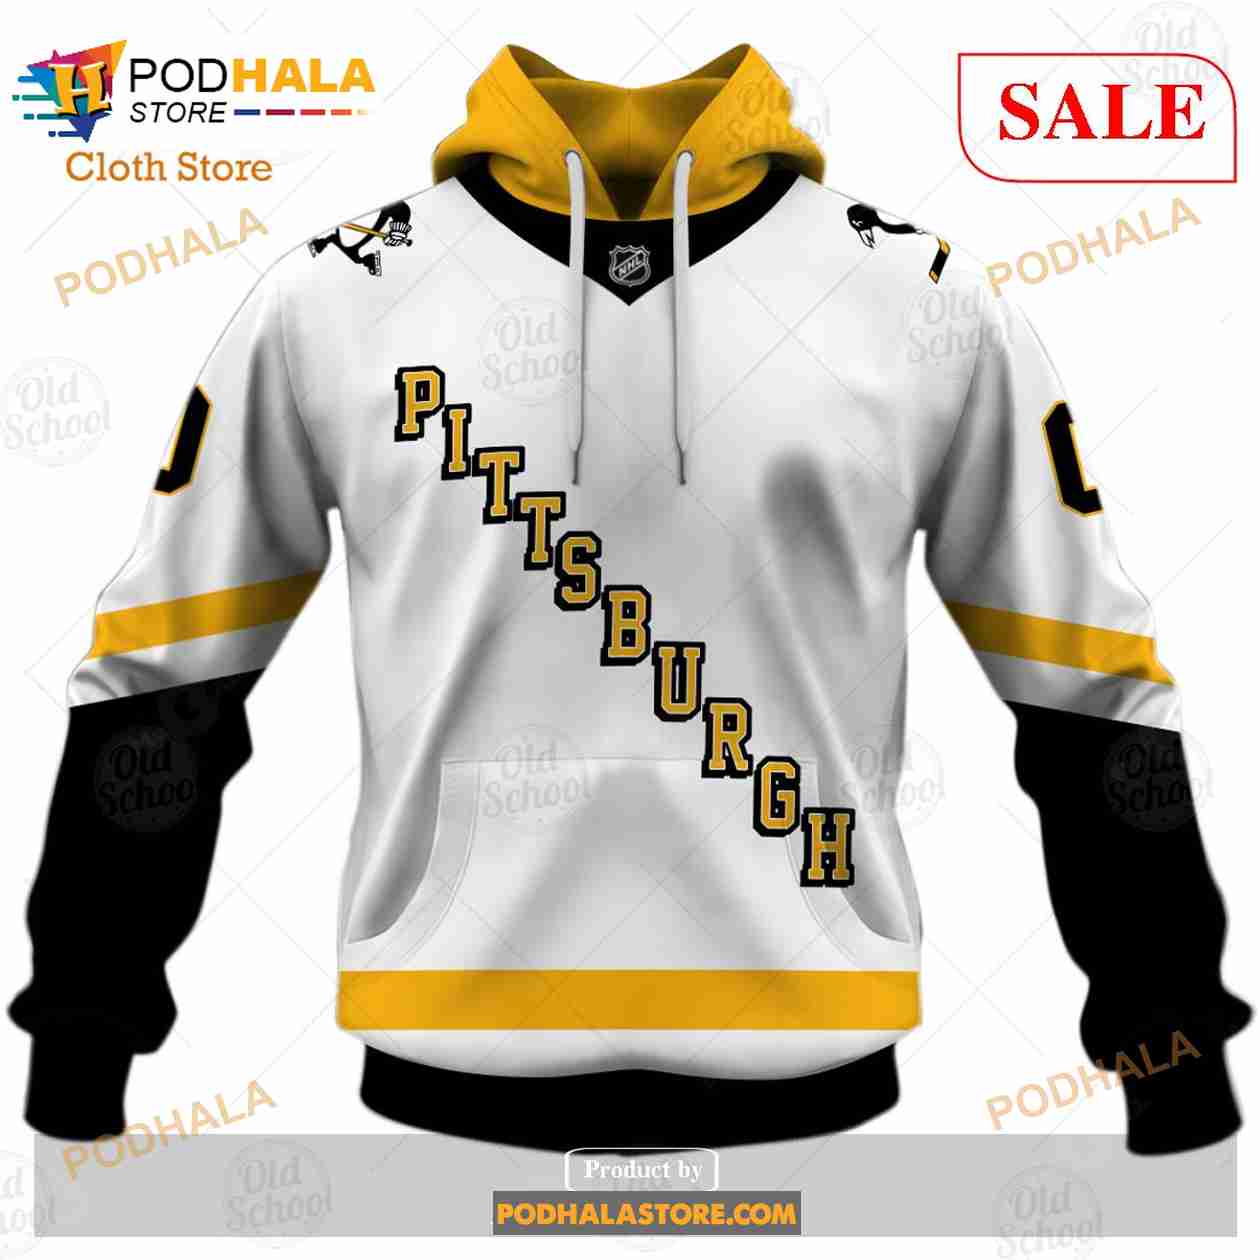 Pittsburgh Penguins Gear, Penguins Jerseys, Pittsburgh Pro Shop, Pittsburgh  Apparel